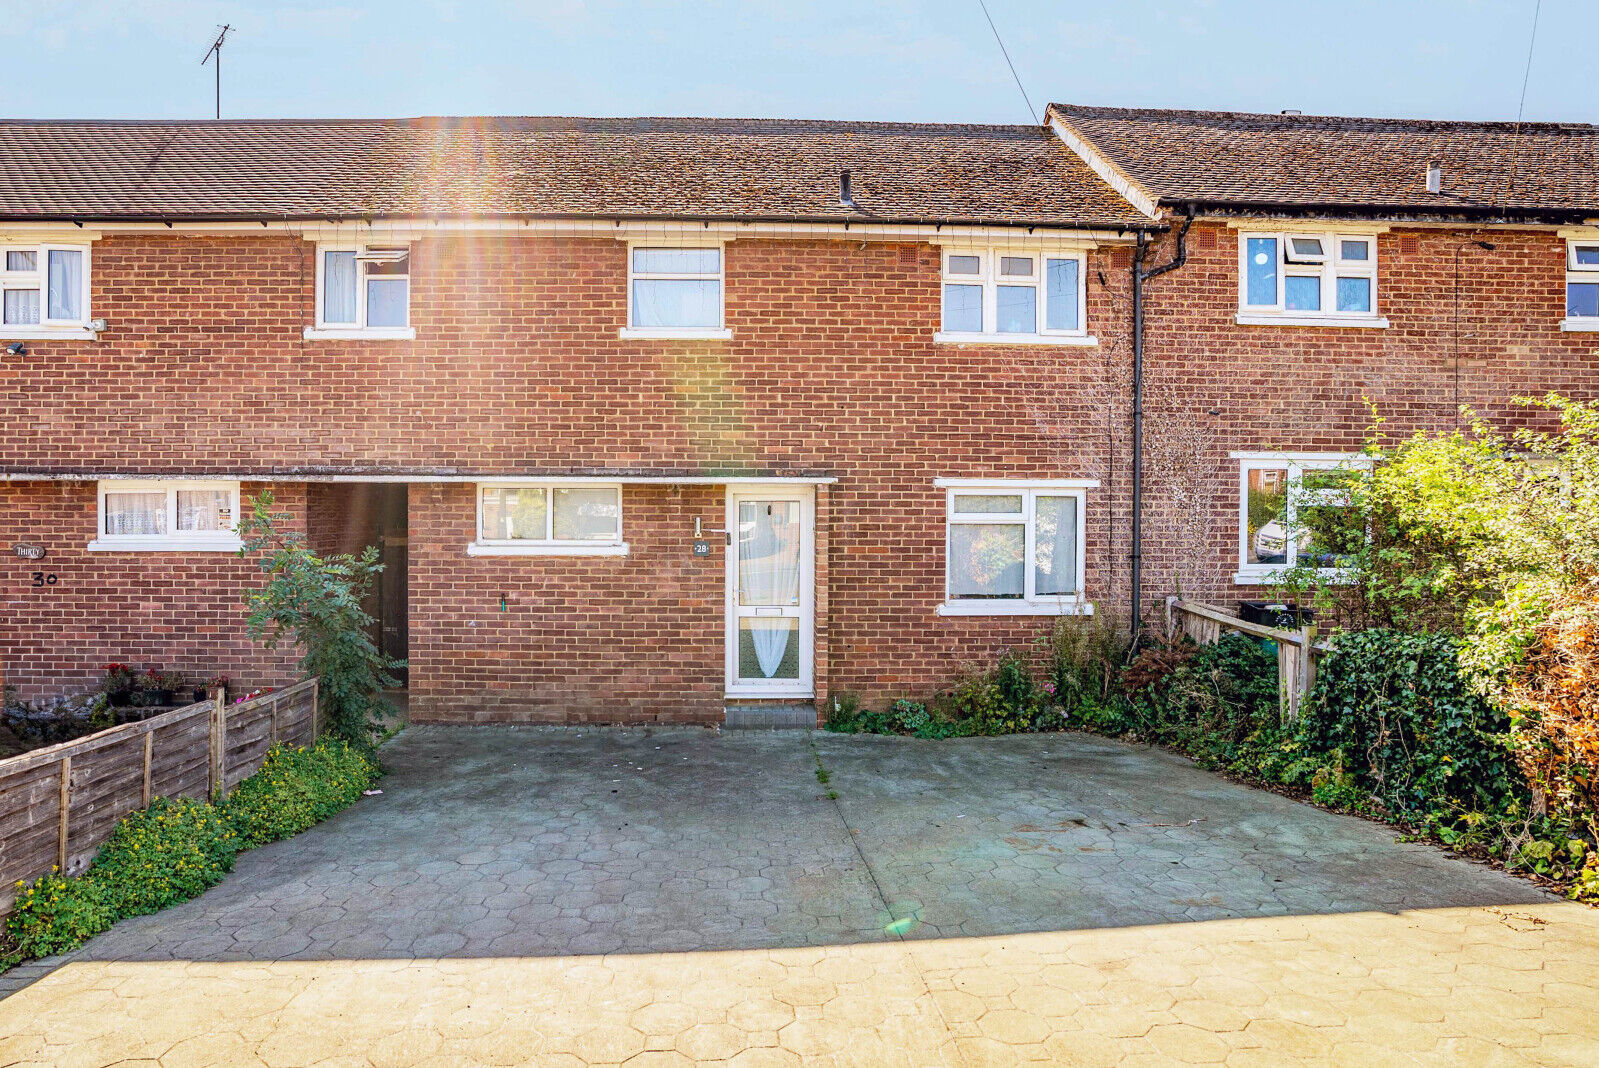 3 bedroom mid terraced house for sale Partridge Road, St. Albans, AL3, main image